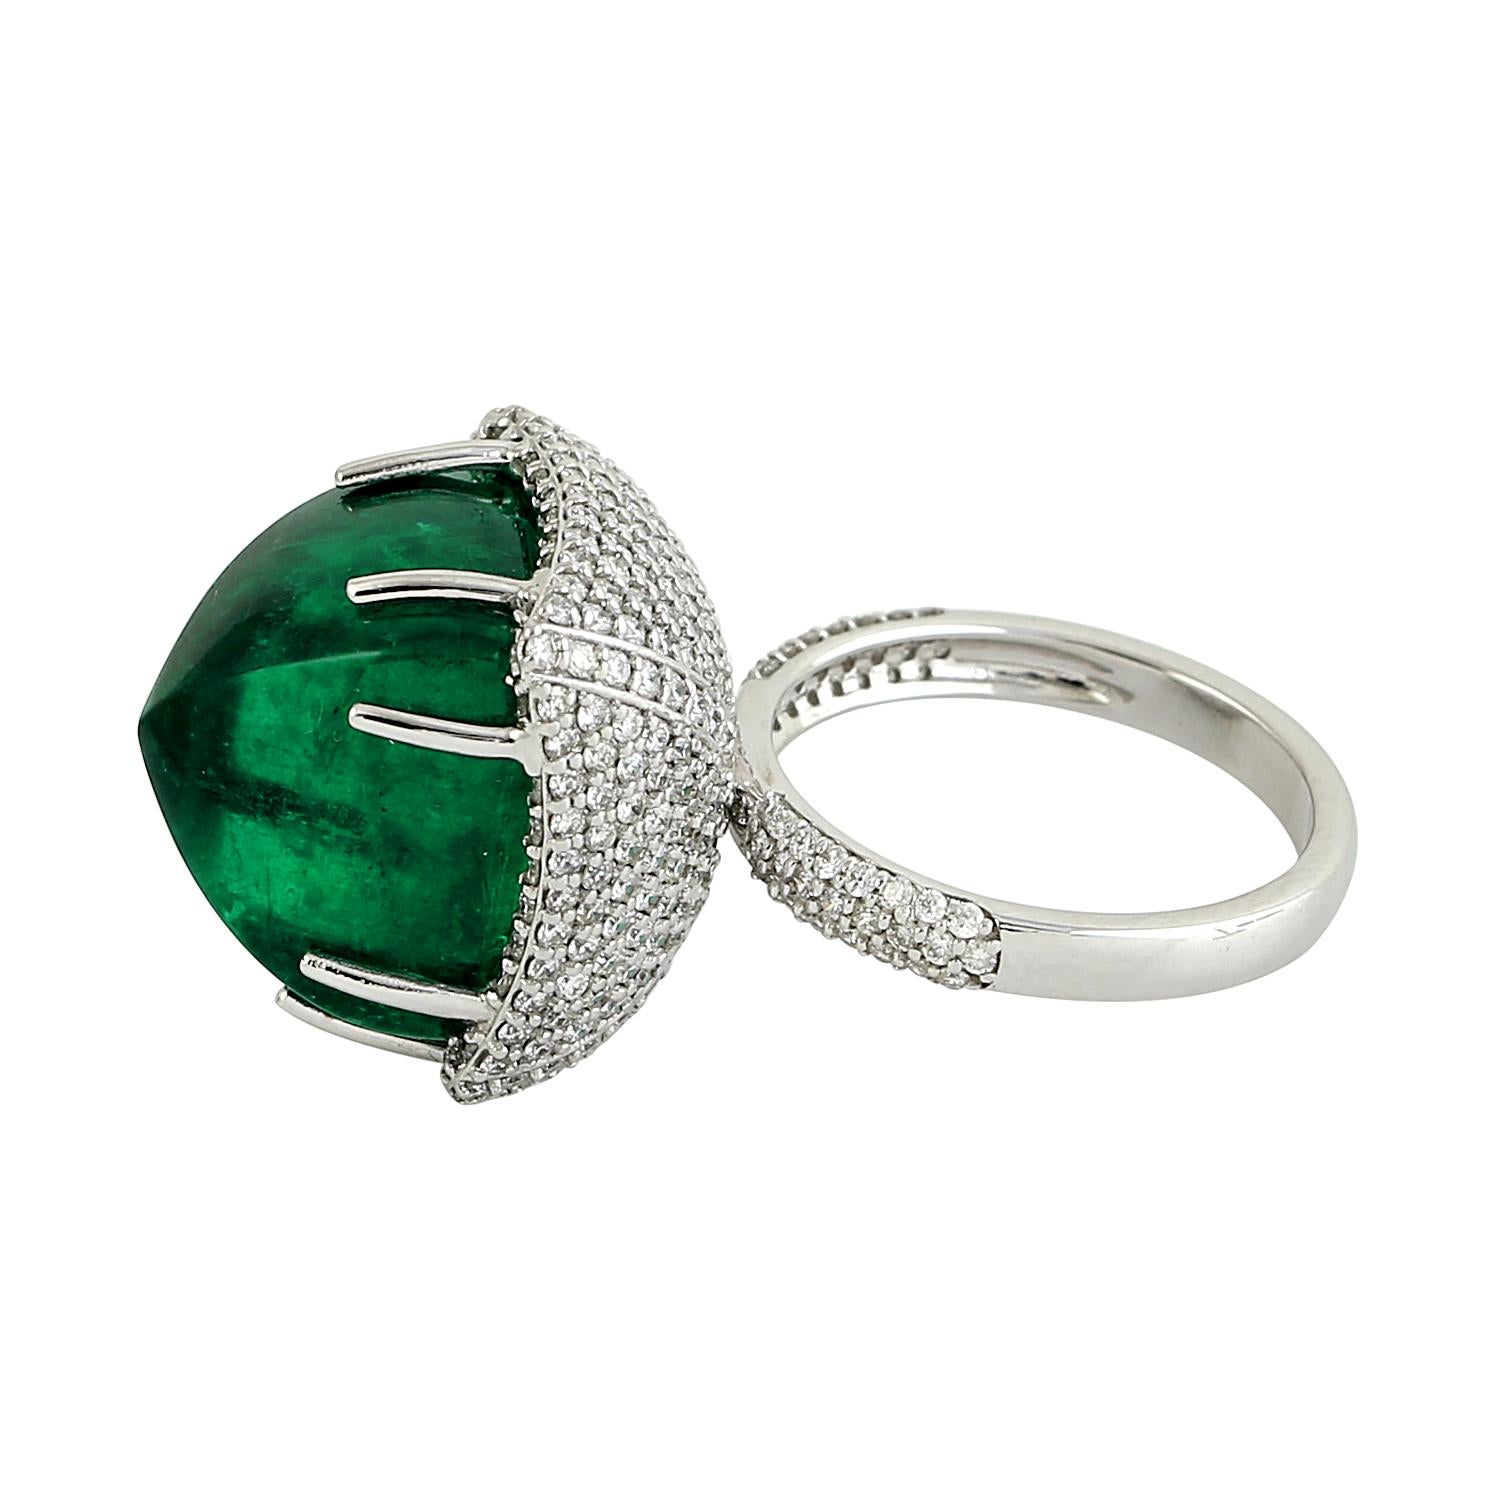 Contemporary 24.61ct Emerald Cocktail Ring With Diamonds Made In 18k White Gold For Sale